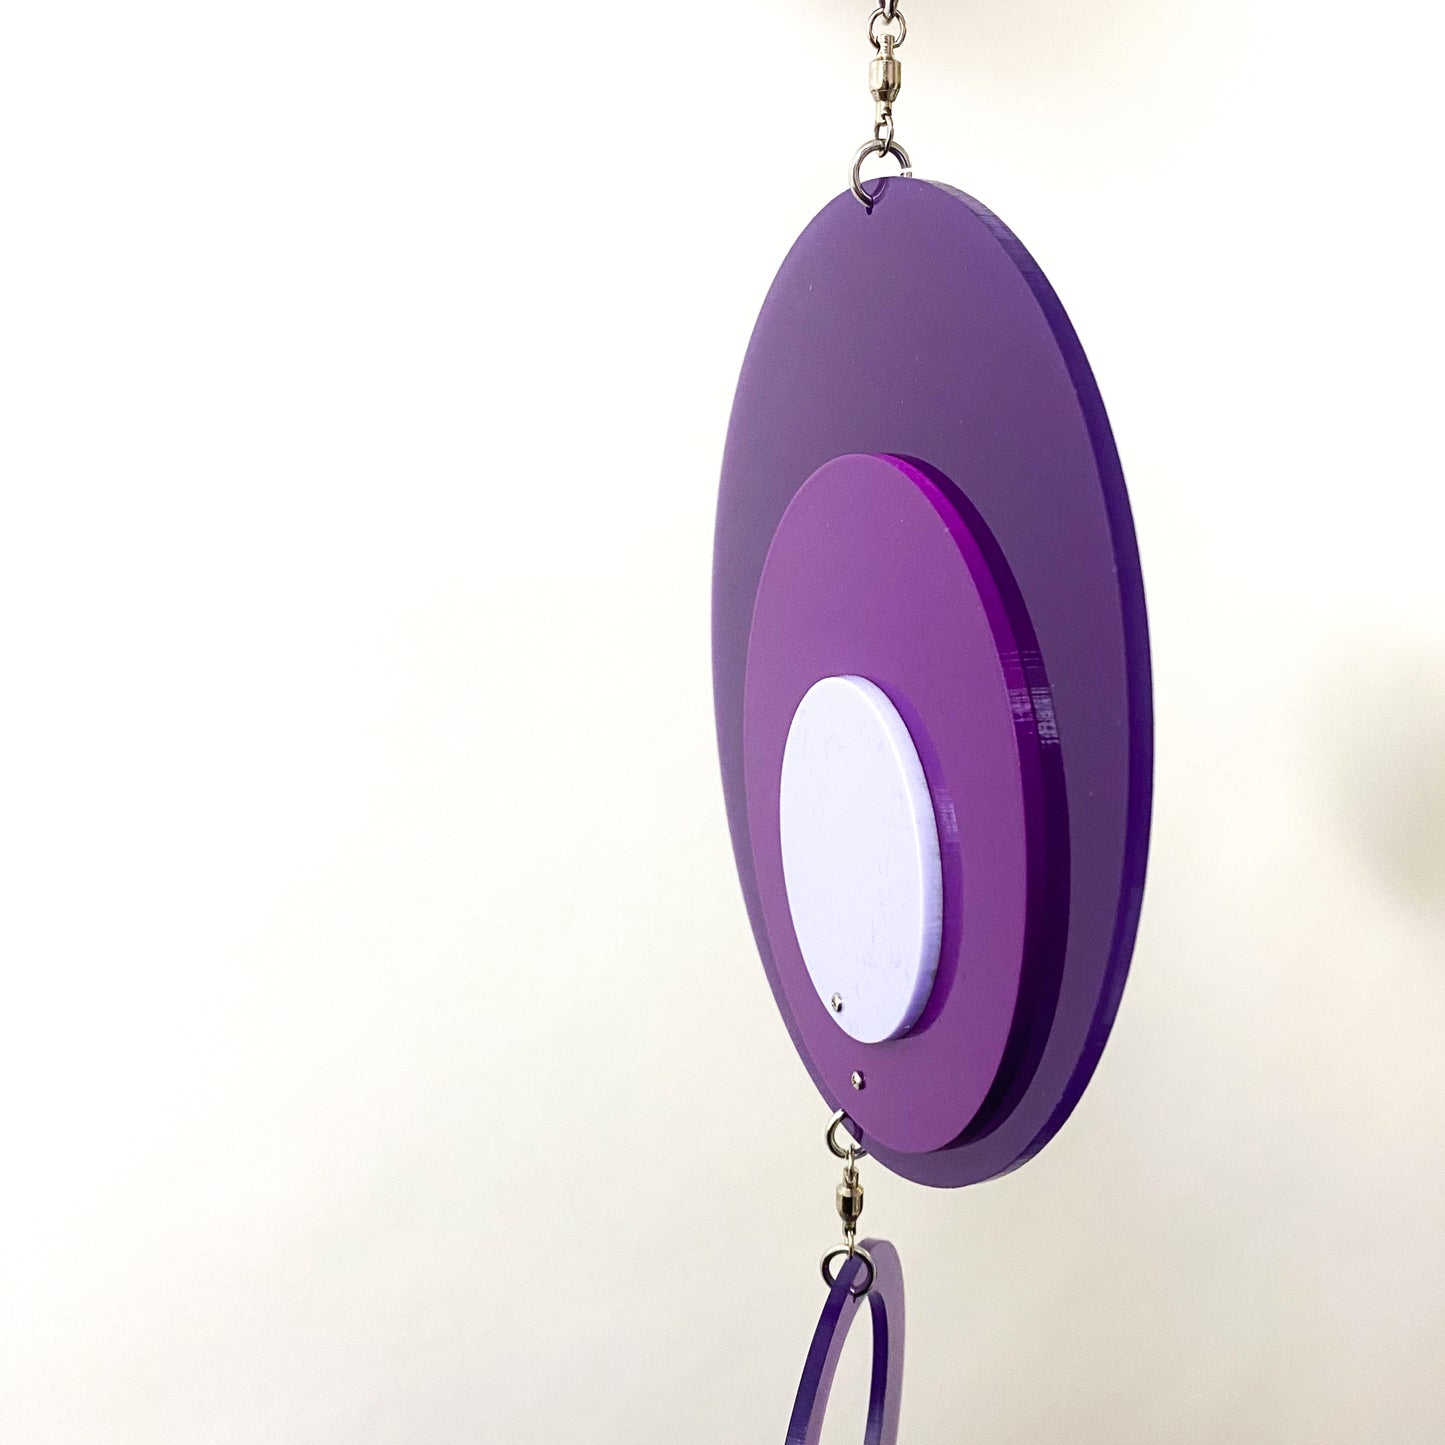 3 Shades of purple - Retro 1970s vertical kinetic art mobile in purple circle DOTS ready to ship today by AtomicMobiles.com